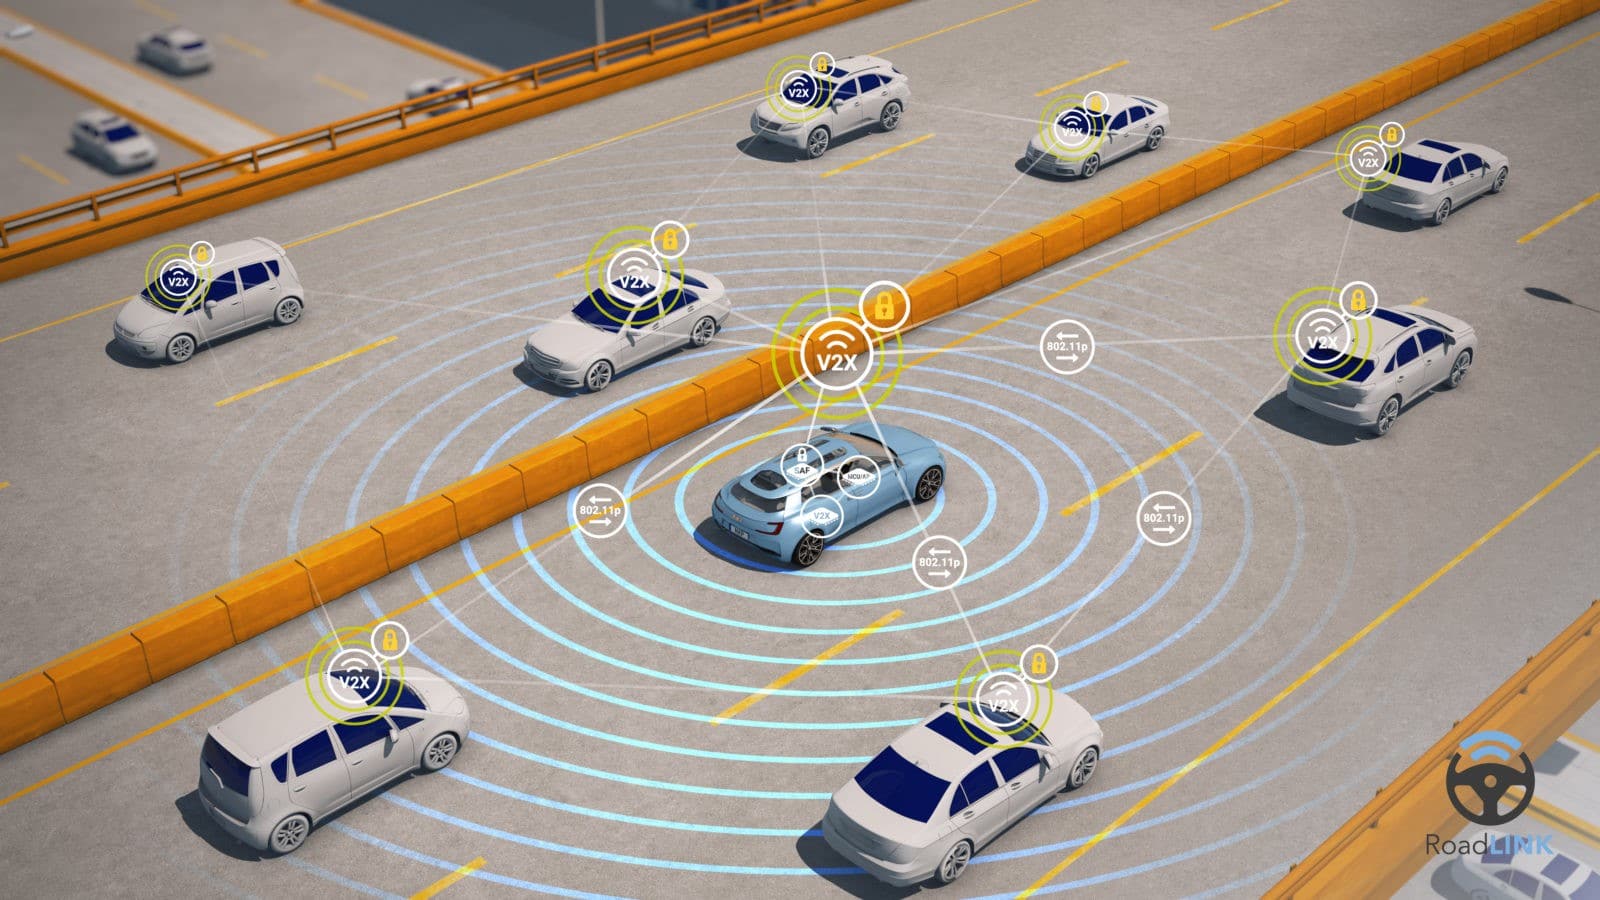 Global Modem Platform Fosters The Boom of Connected Cars